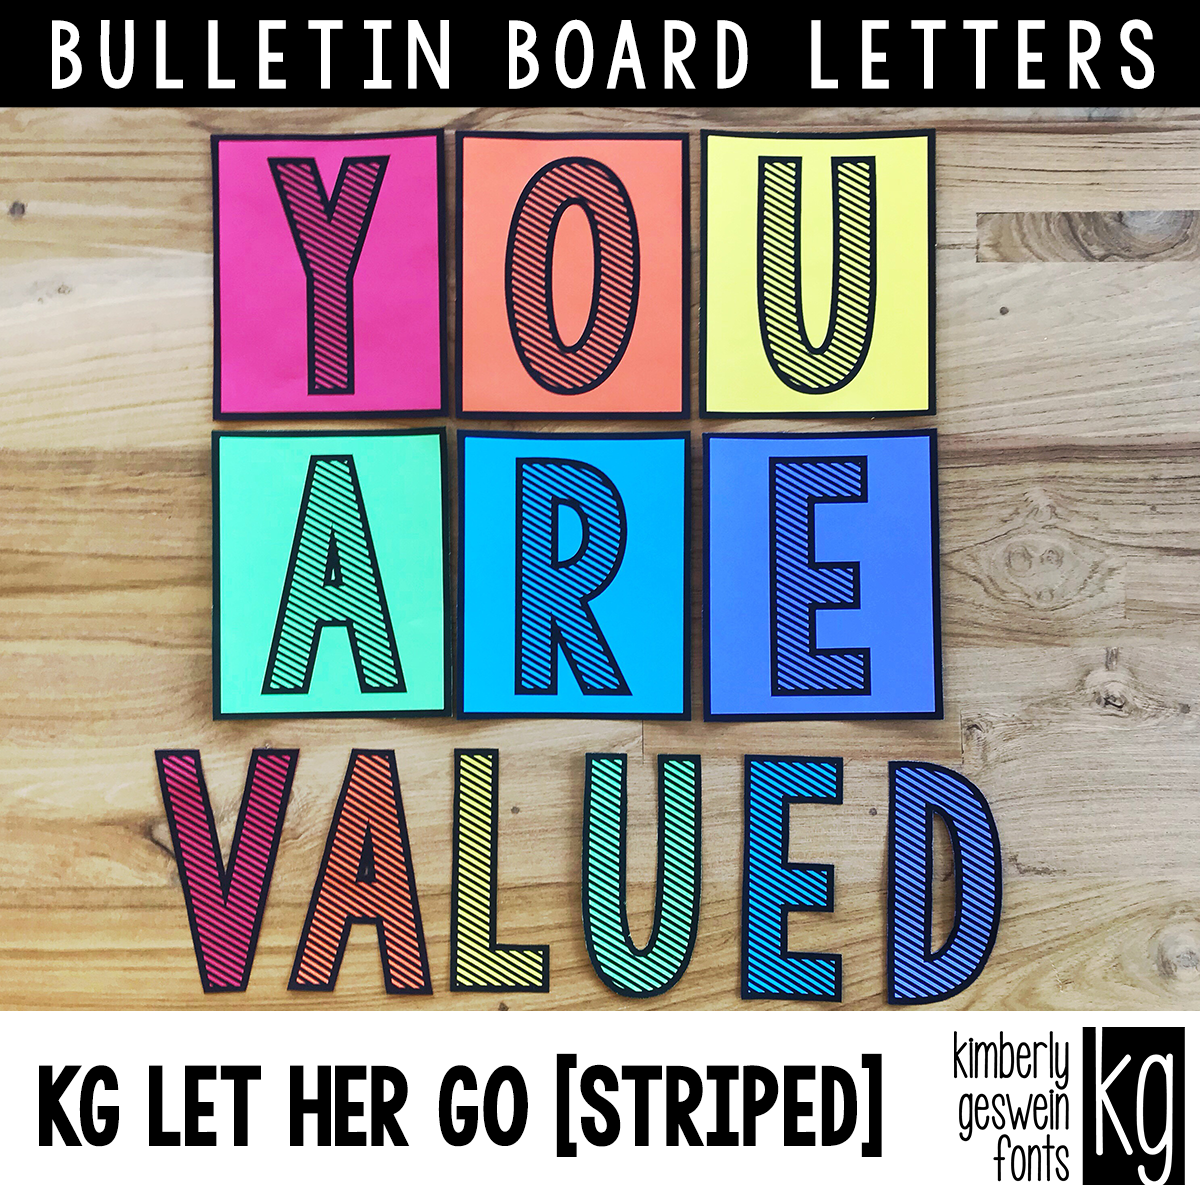 KG Let Her Go STRIPED Bulletin Board Letters - Kimberly Geswein Fonts